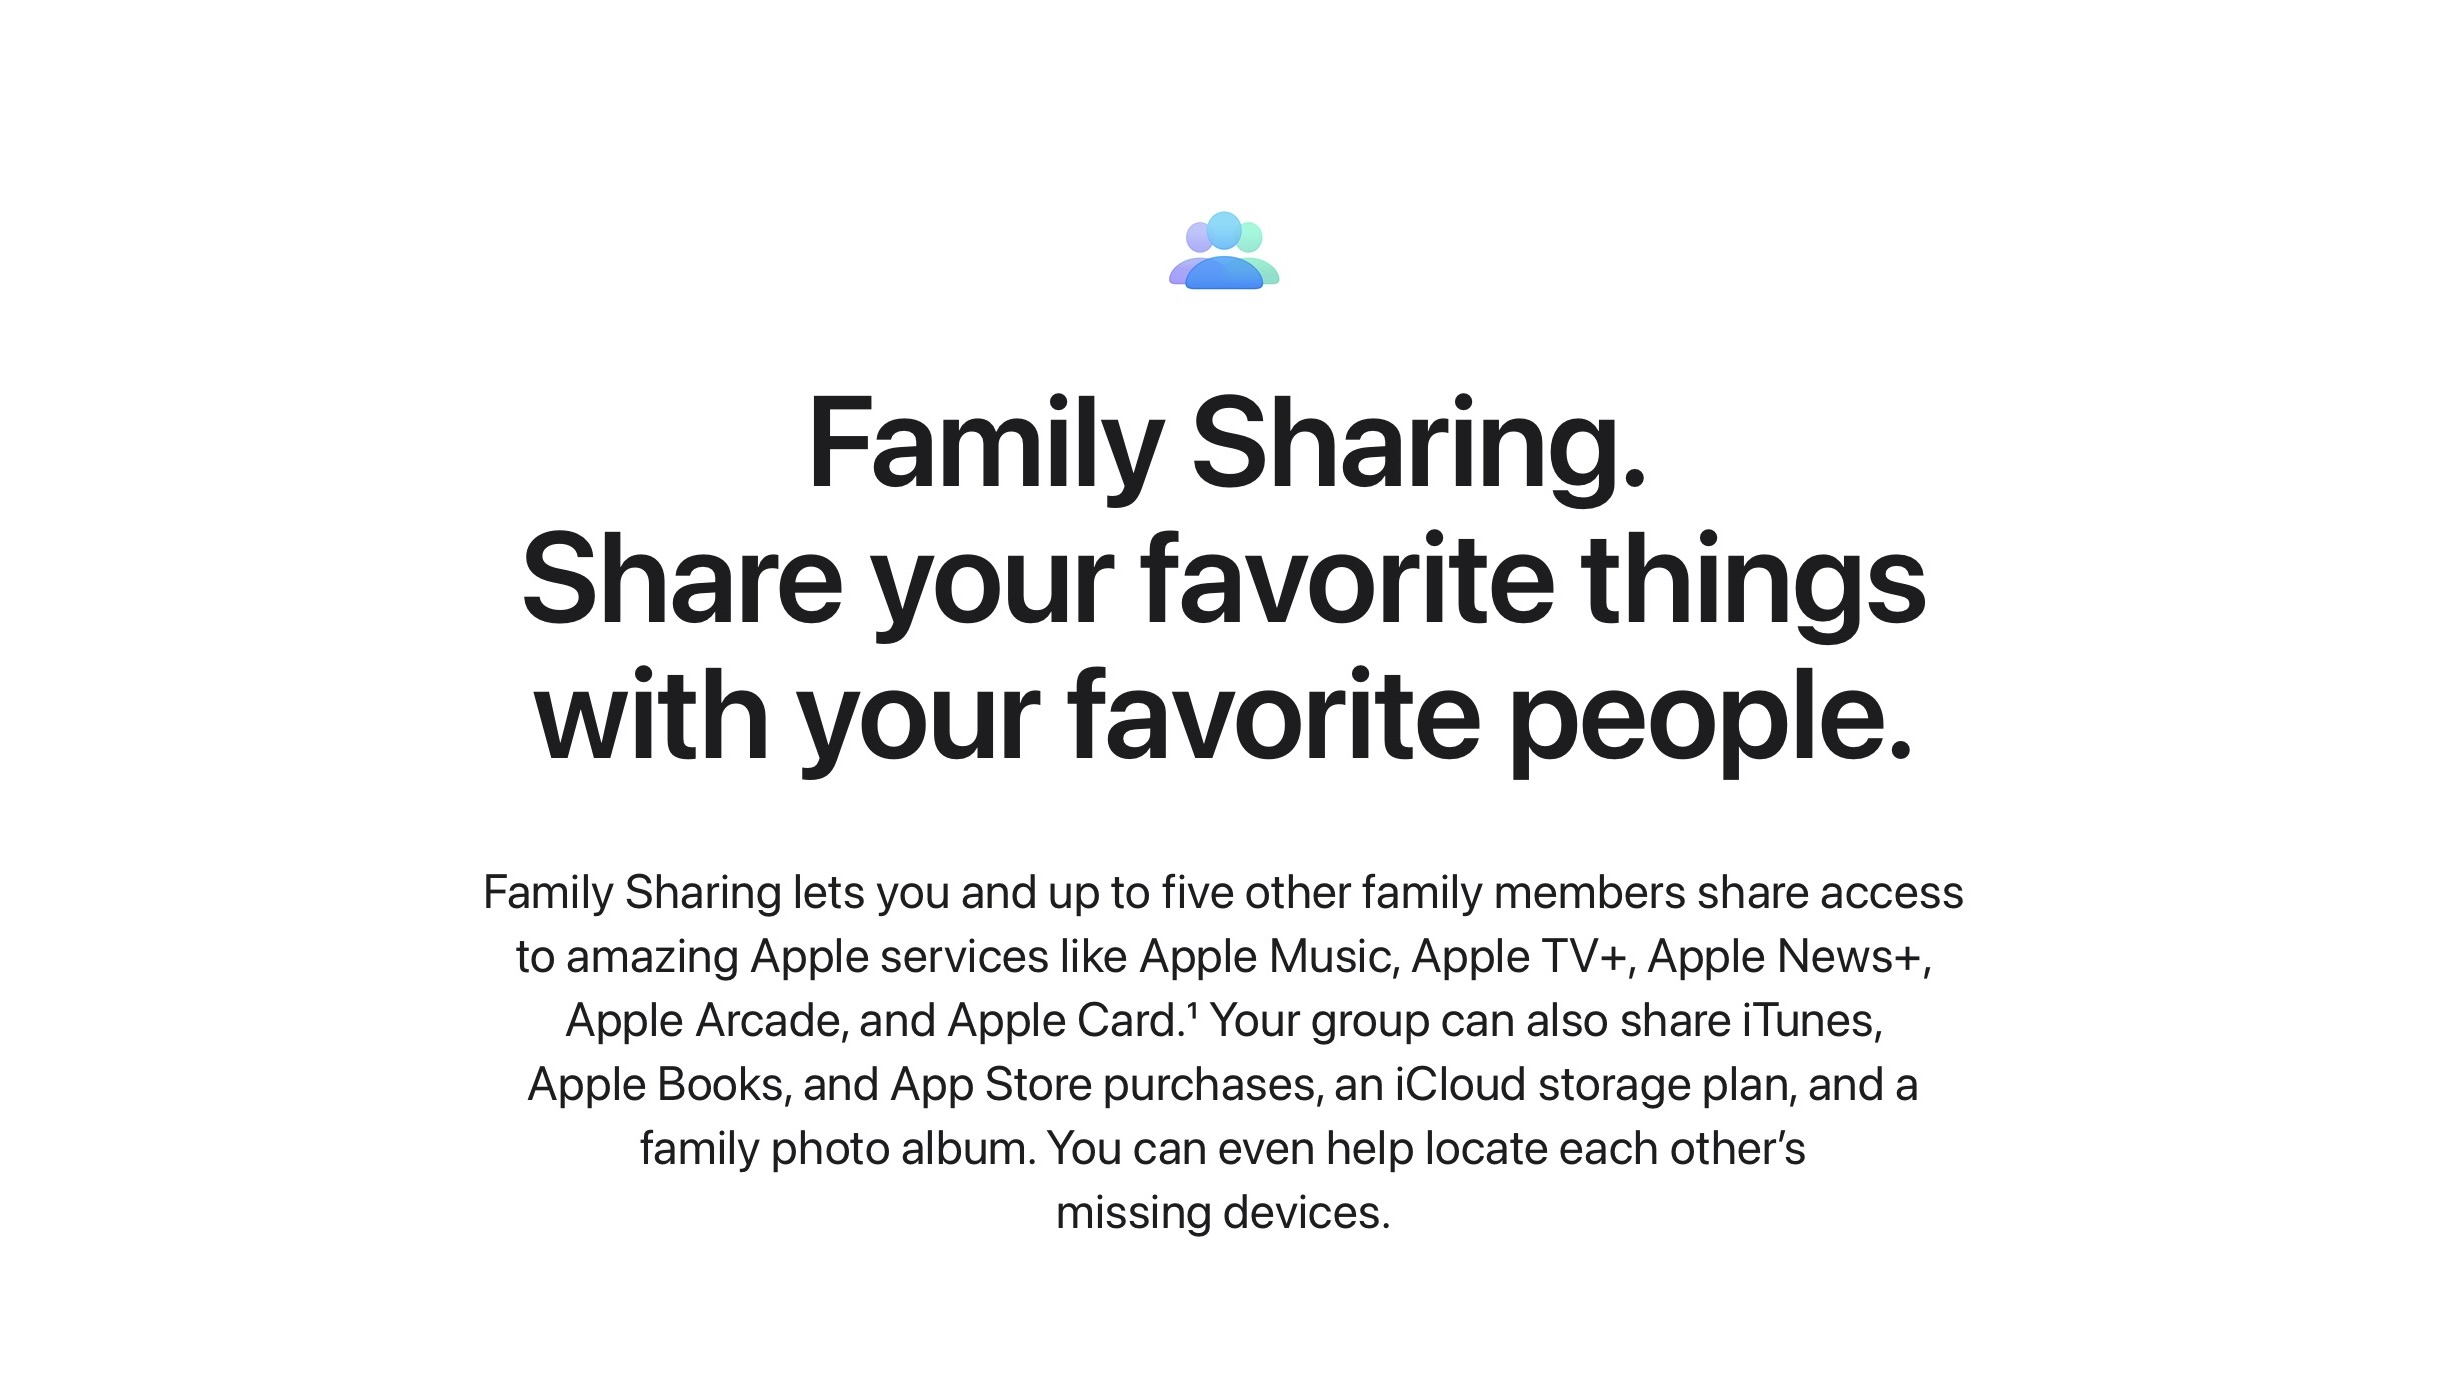 How to Share an Apple Card With Your Family